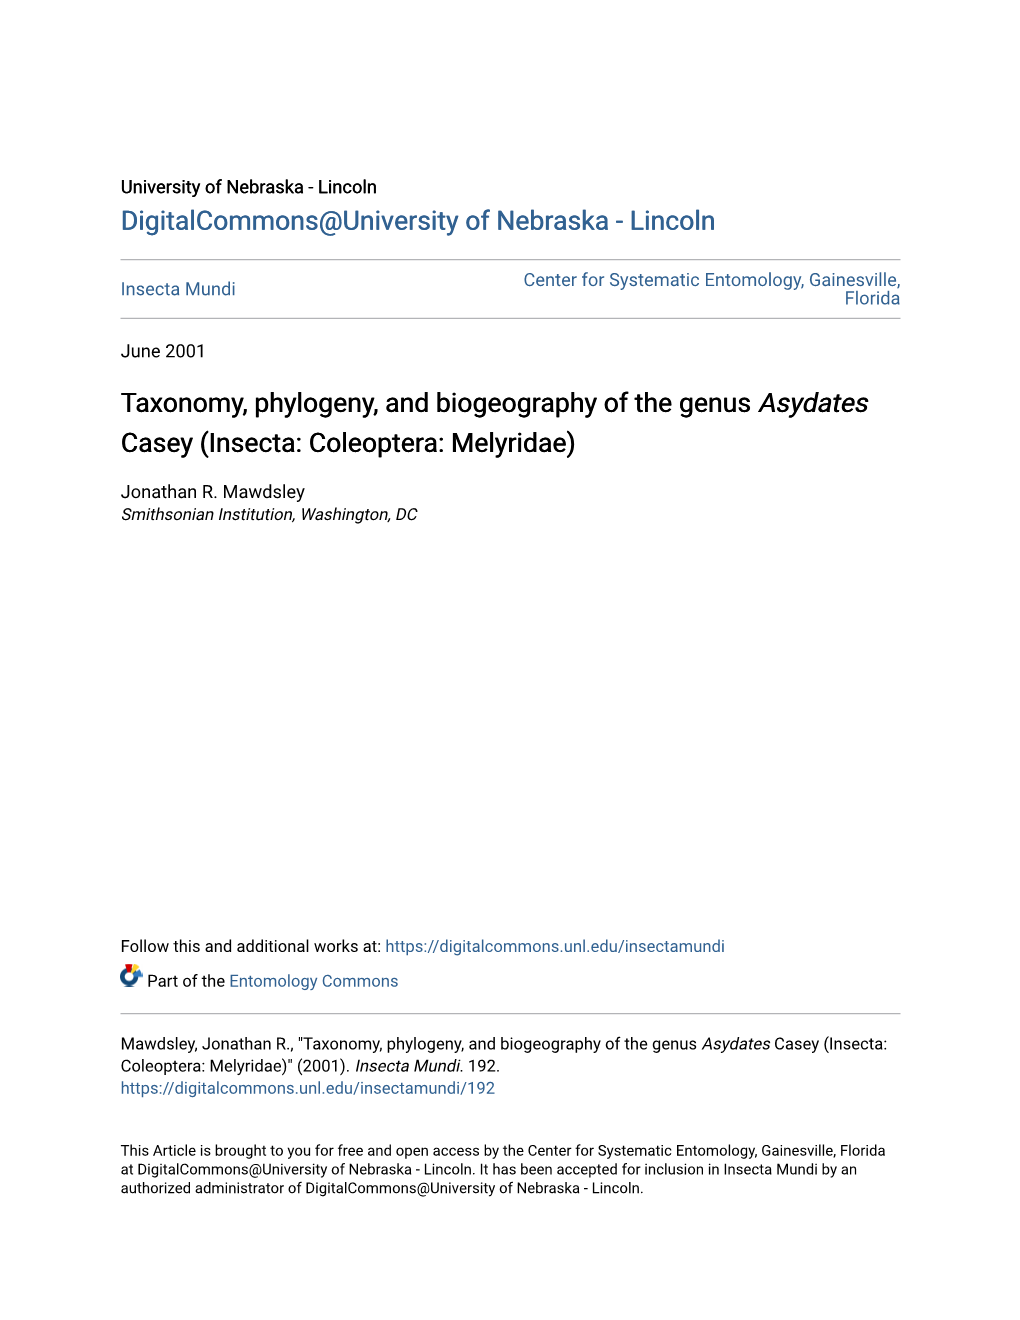 Taxonomy, Phylogeny, and Biogeography of the Genus Asydates Casey (Insecta: Coleoptera: Melyridae)